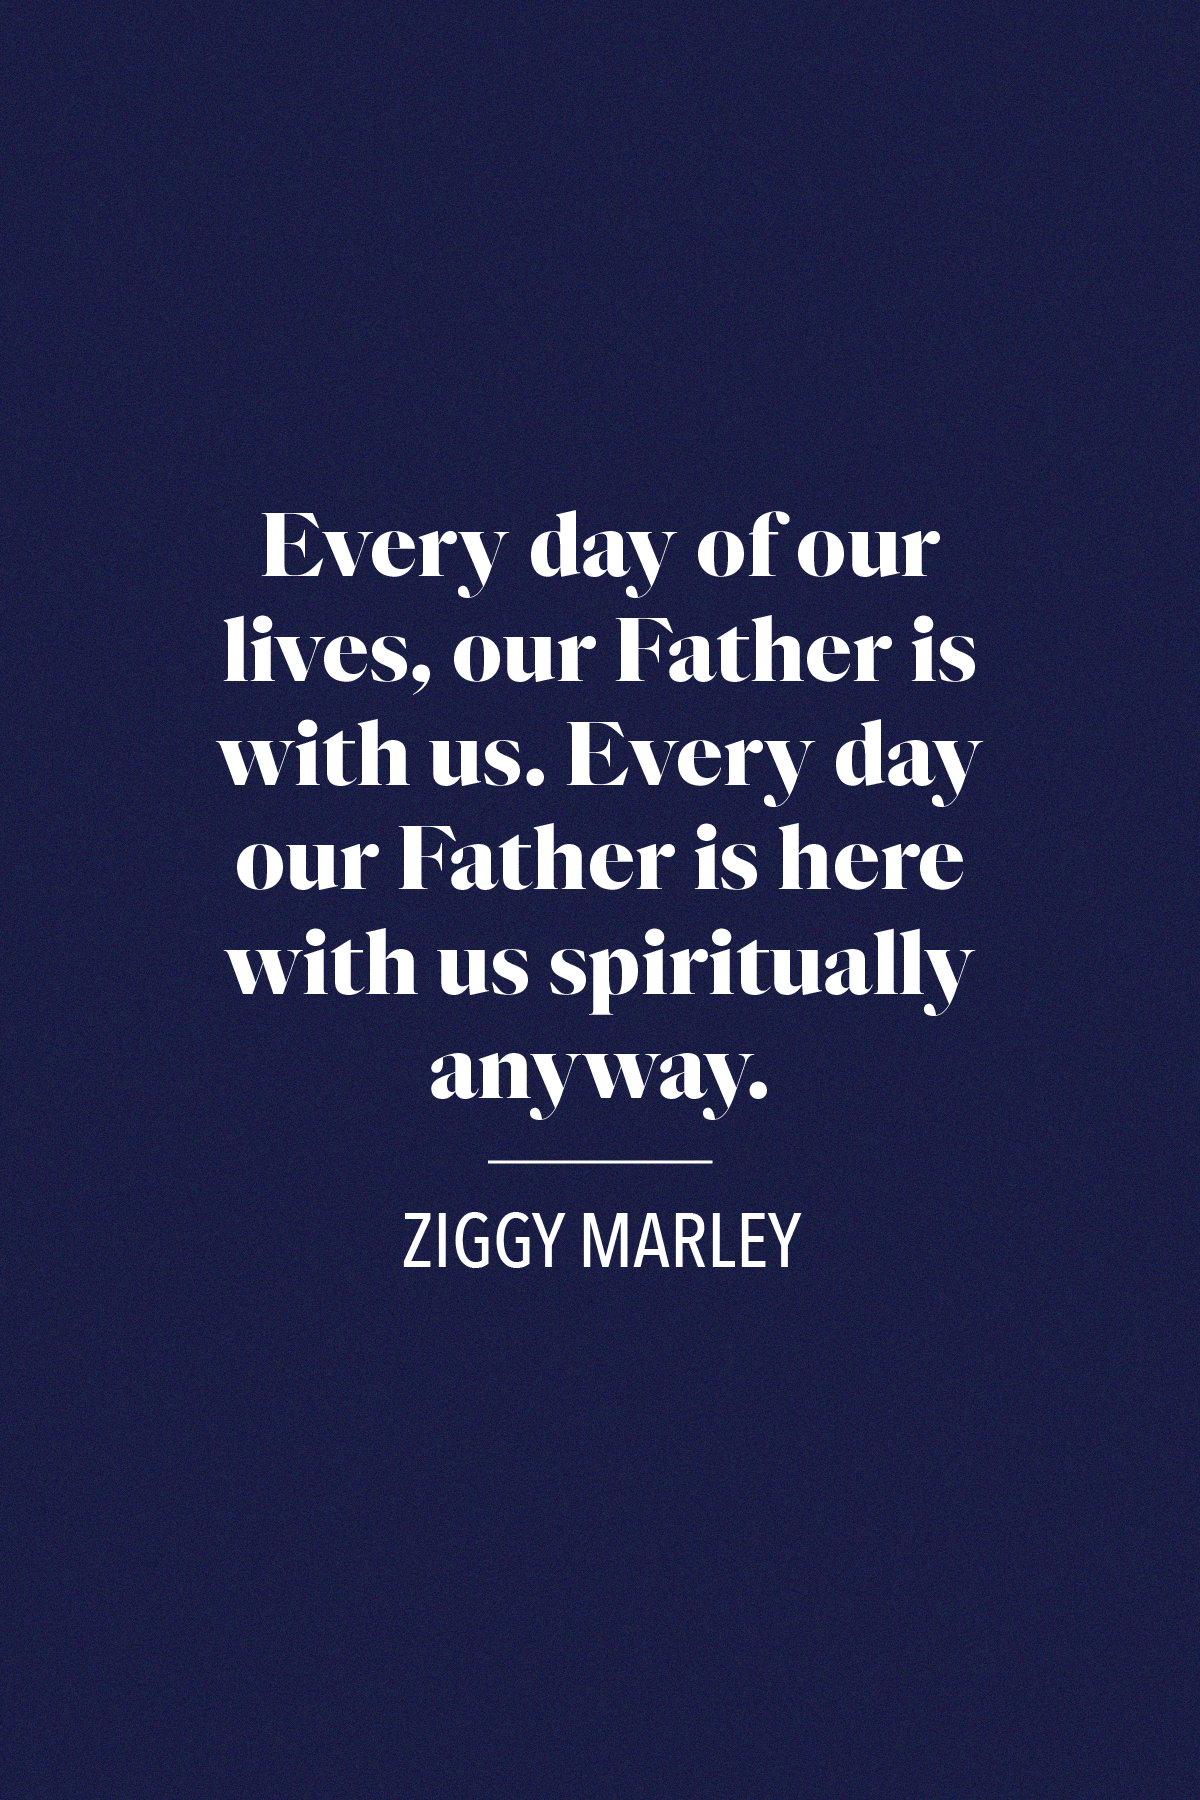 43 Sympathetic Quotes About Loss Of Father